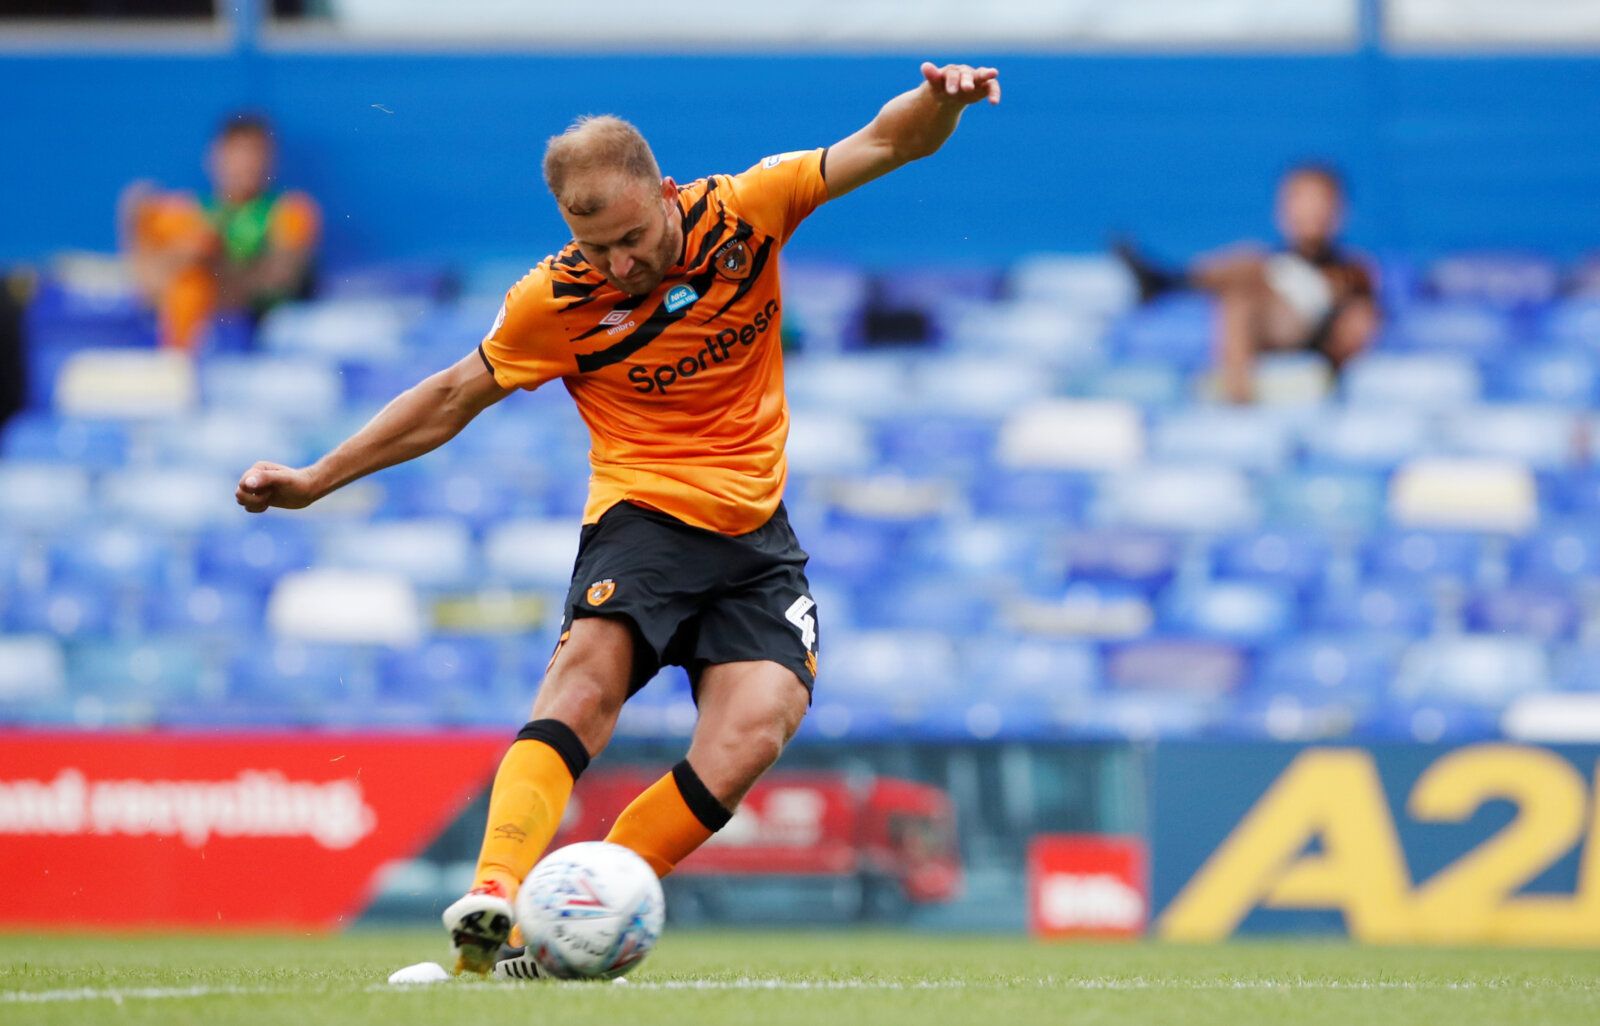 Soccer Football - Championship - Birmingham City v Hull City - St Andrew's, Birmingham, Britain - June 27, 2020 Hull City's Herbie Kane scores their third goal, as play resumes behind closed doors following the outbreak of the coronavirus disease (COVID-19)  Action Images/Andrew Couldridge  EDITORIAL USE ONLY. No use with unauthorized audio, video, data, fixture lists, club/league logos or 